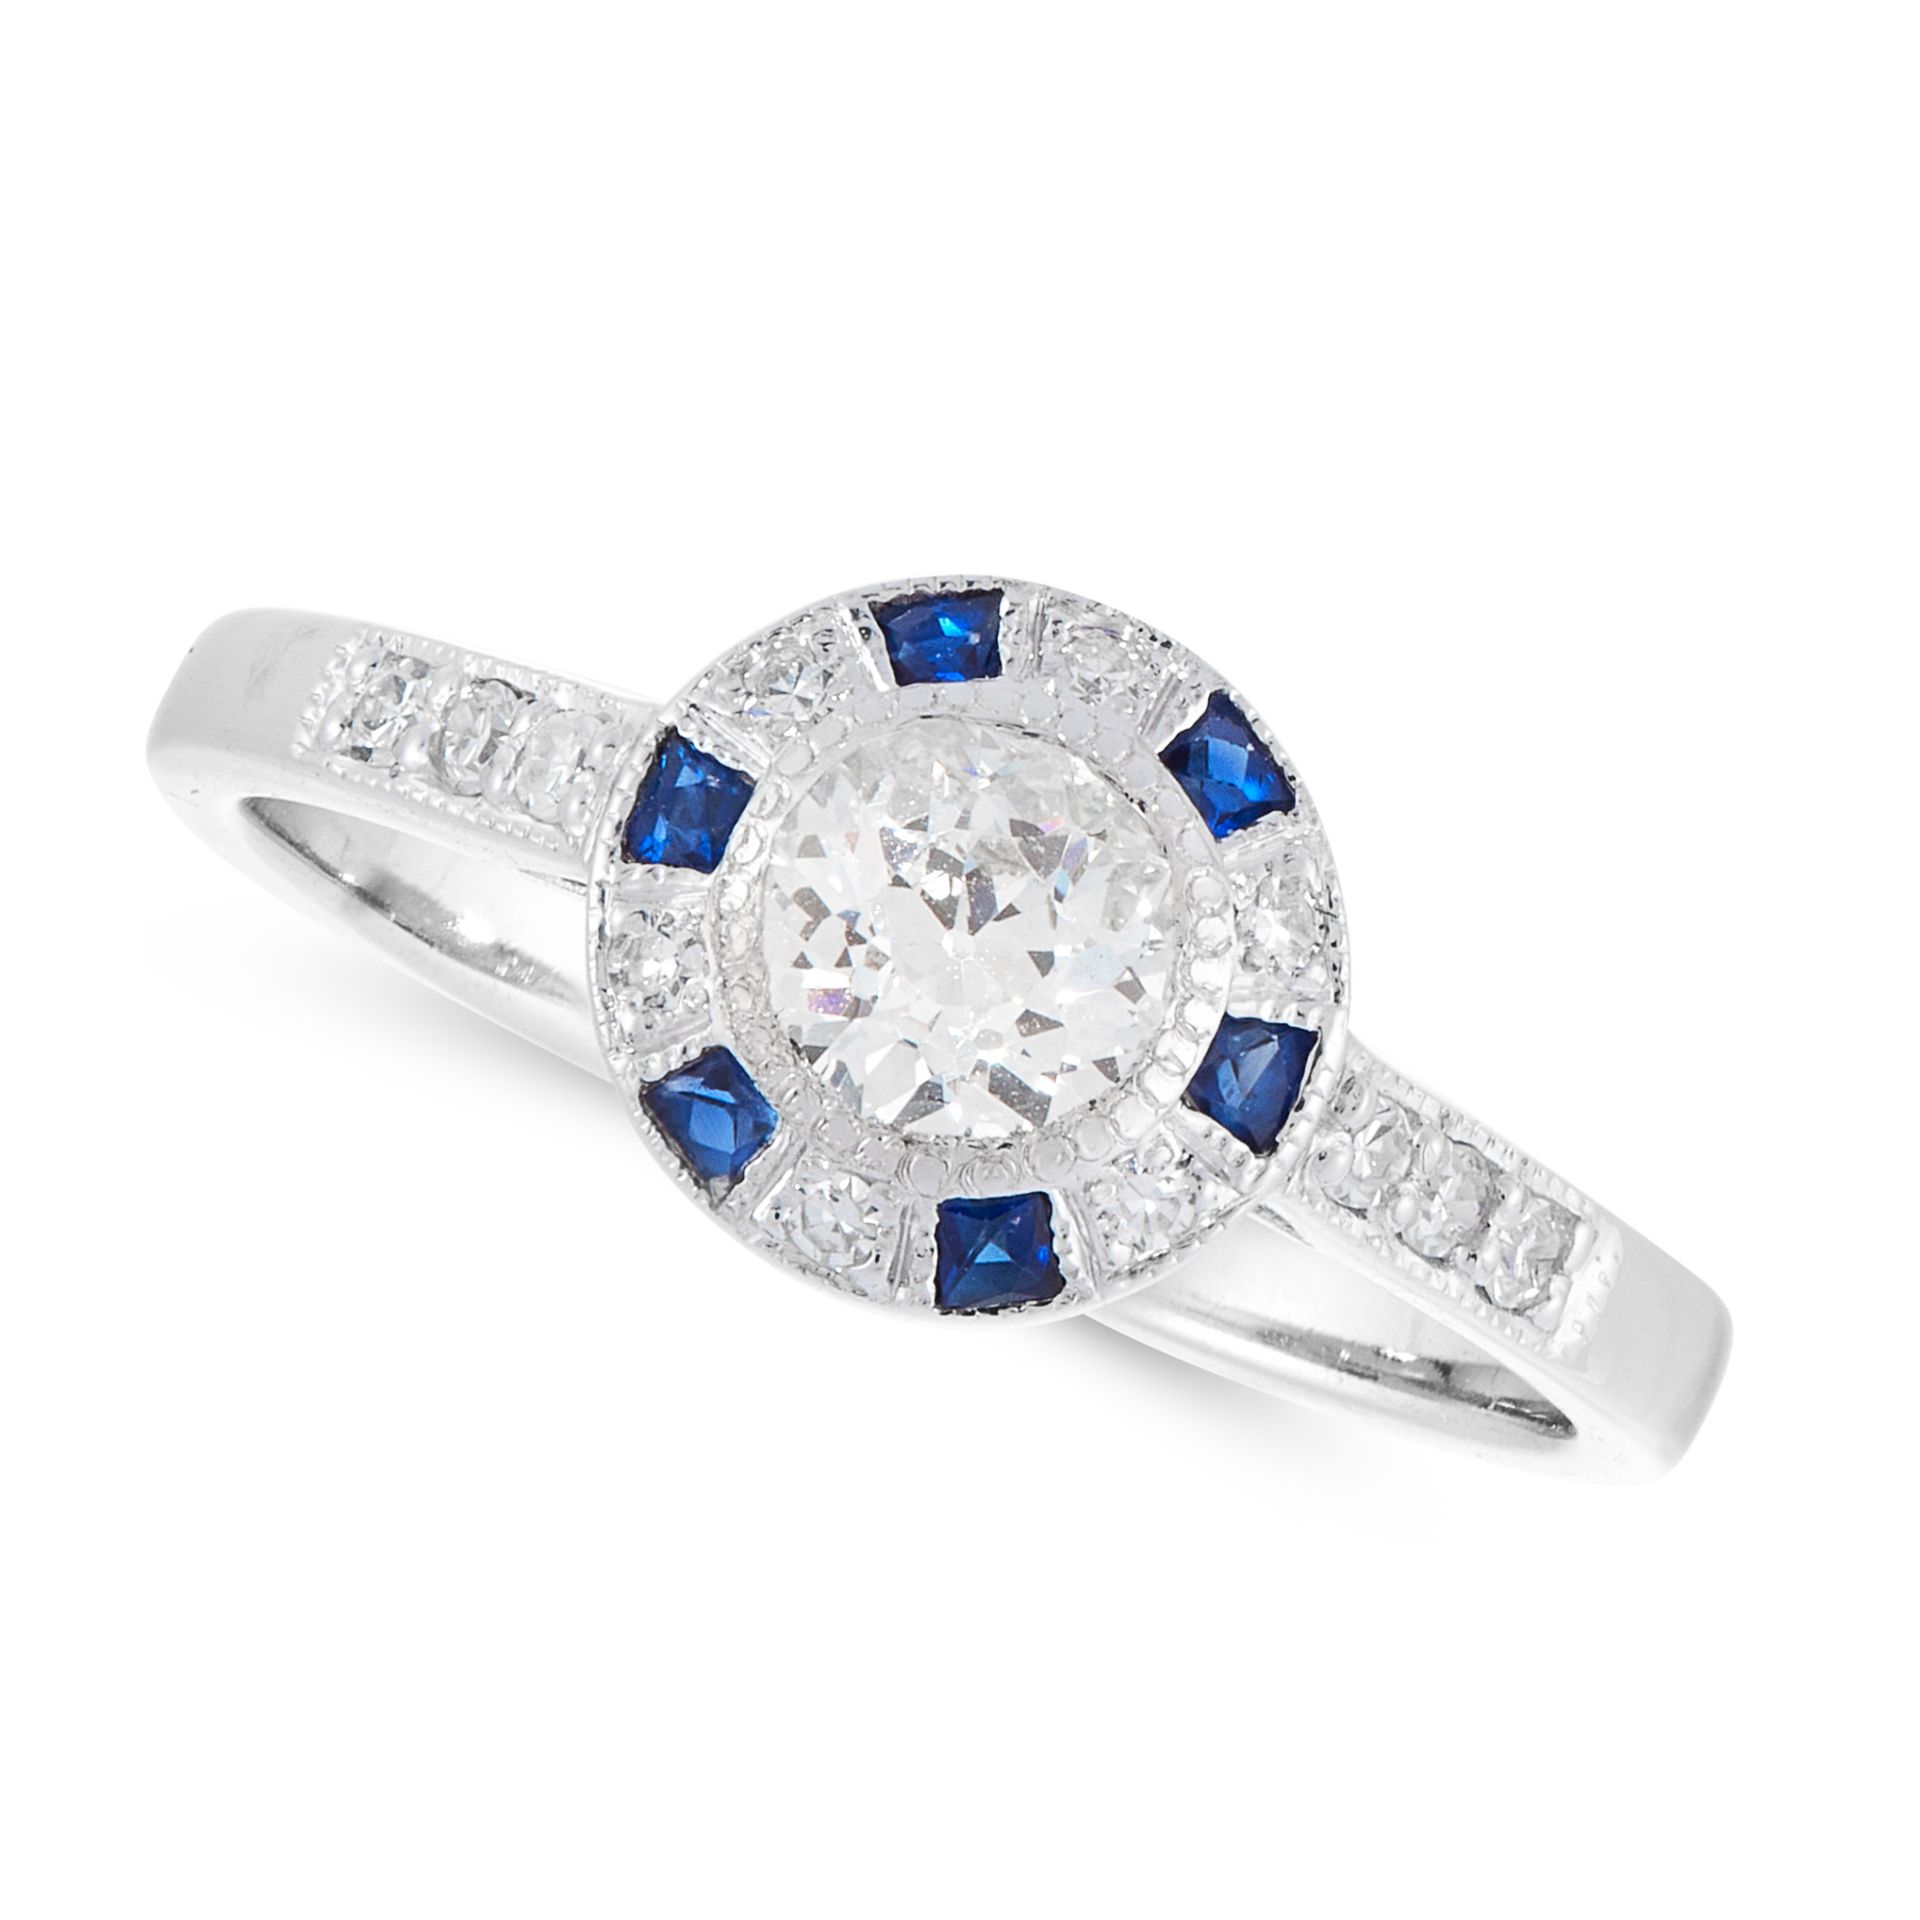 A DIAMOND AND SAPPHIRE TARGET RING in 18ct white gold, set with a principal old cut diamond of 0.